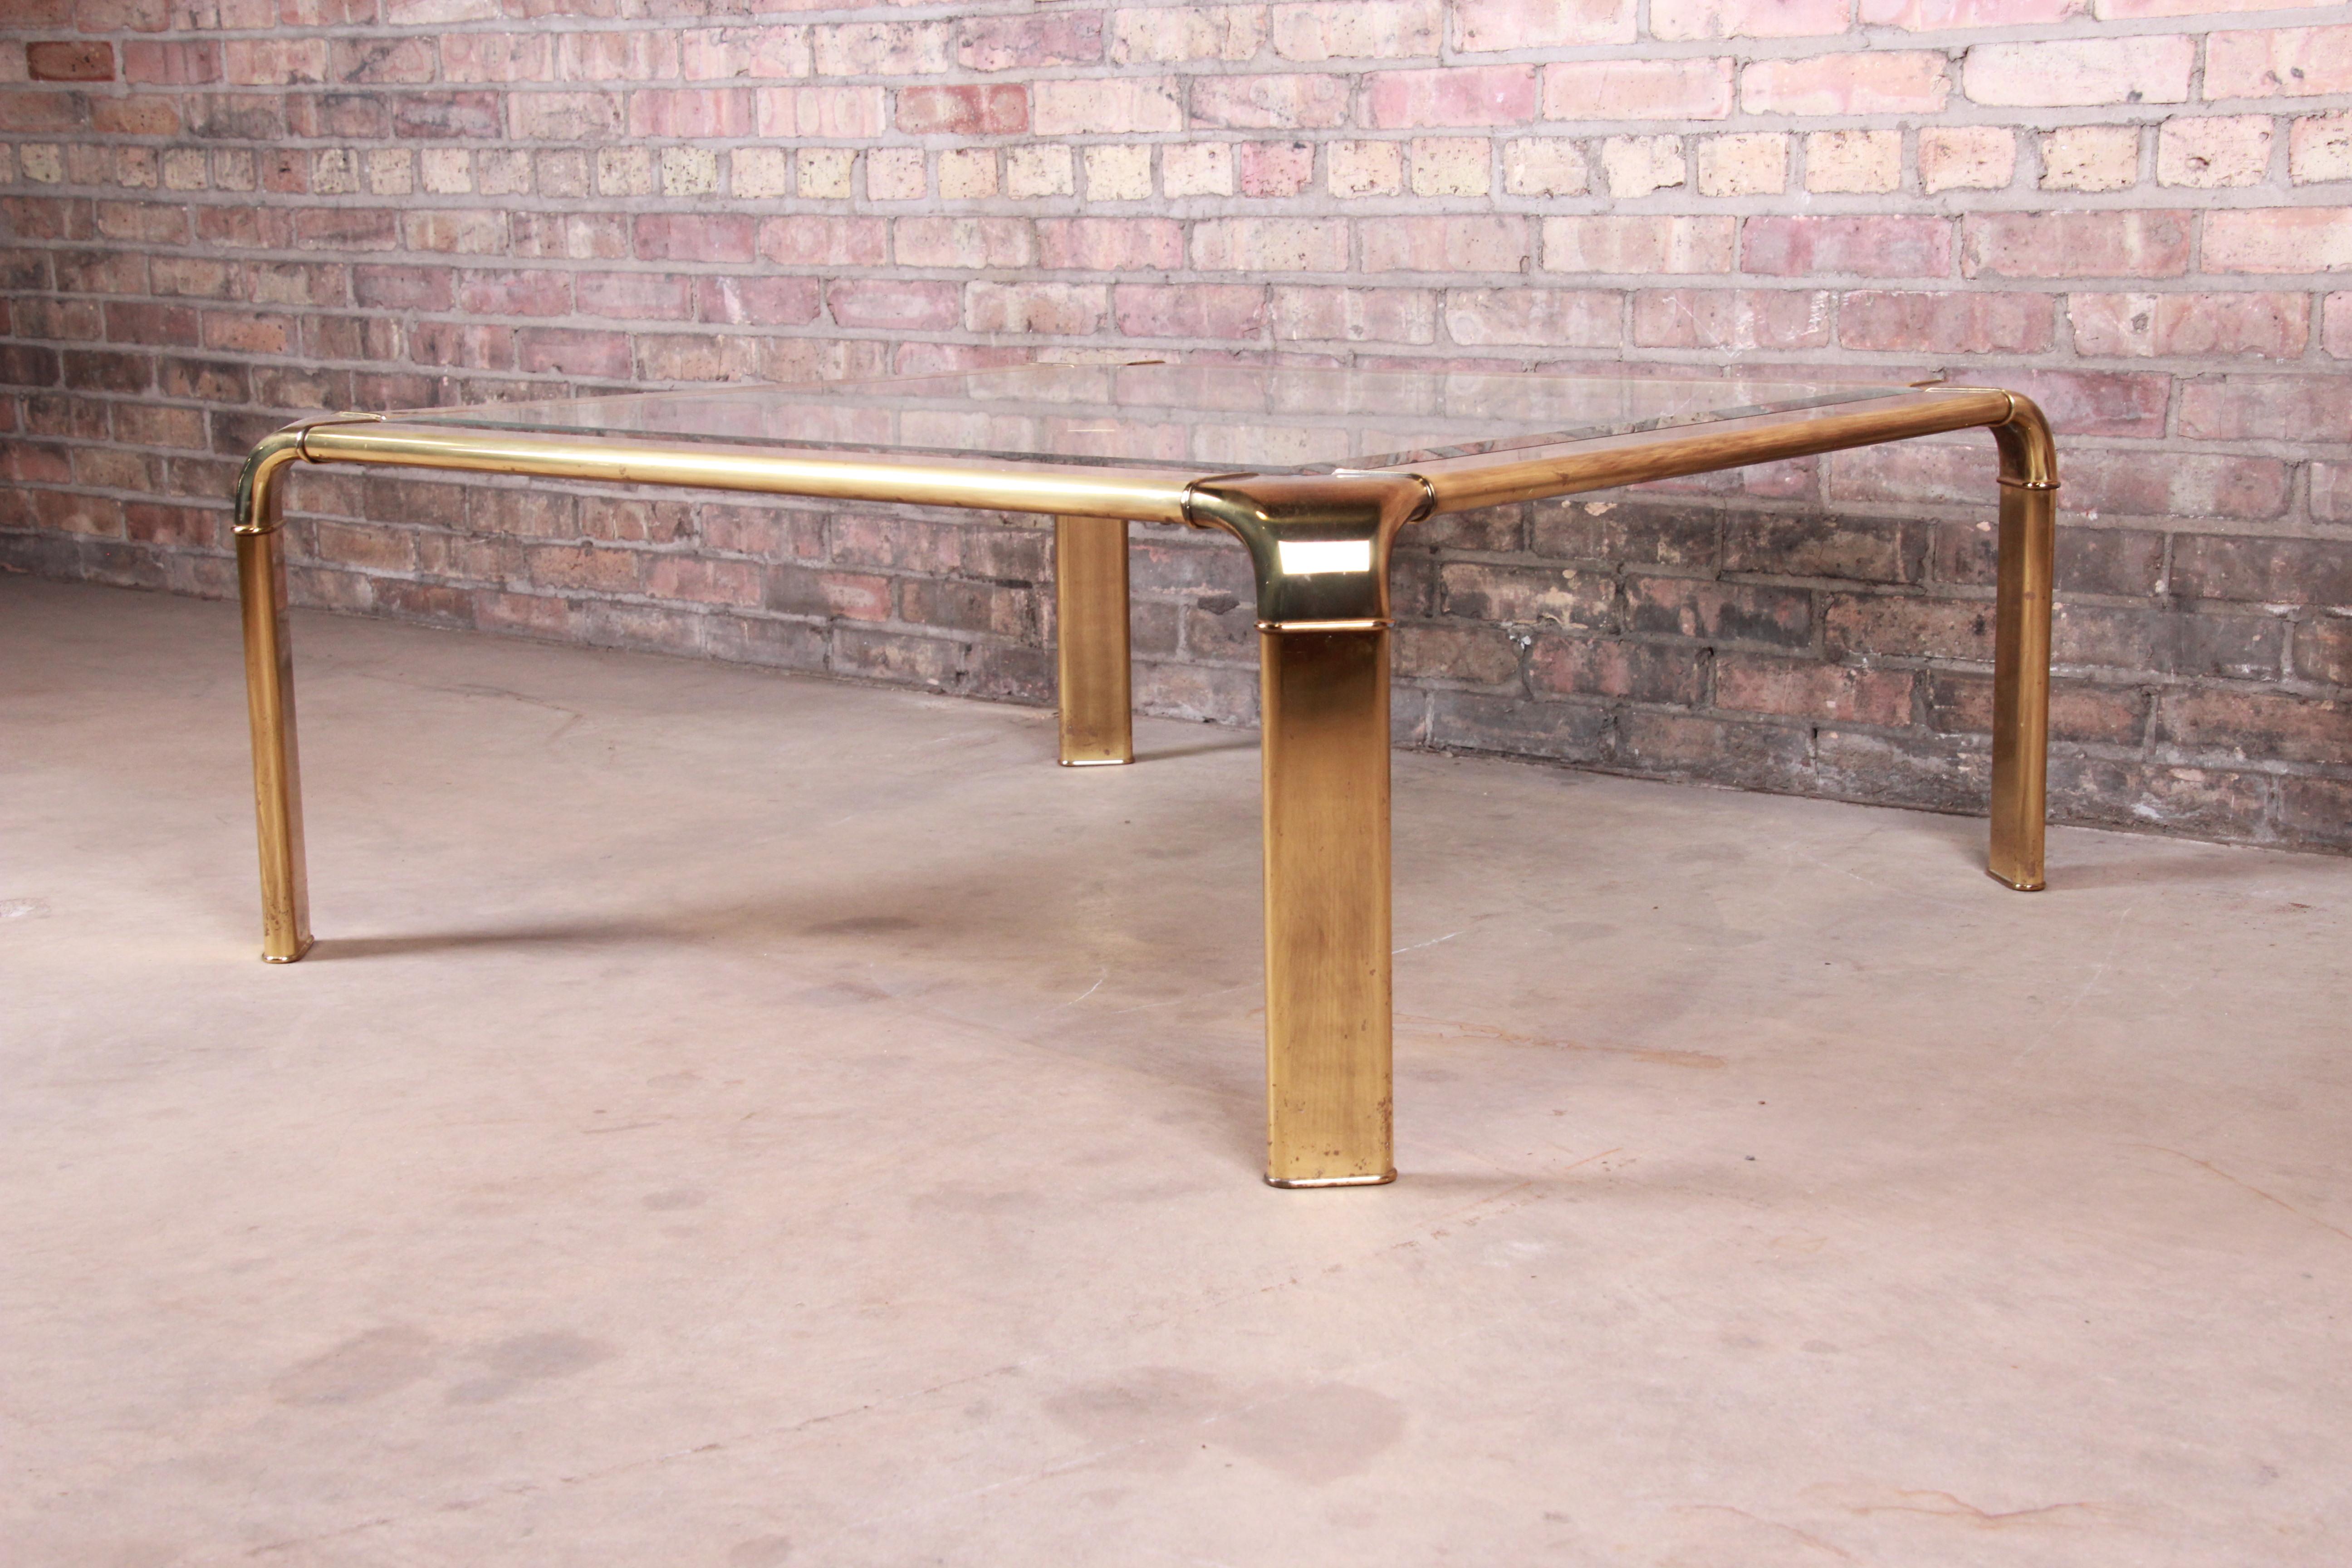 Beveled John Widdicomb Hollywood Regency Brass and Glass Cocktail Table, circa 1970s